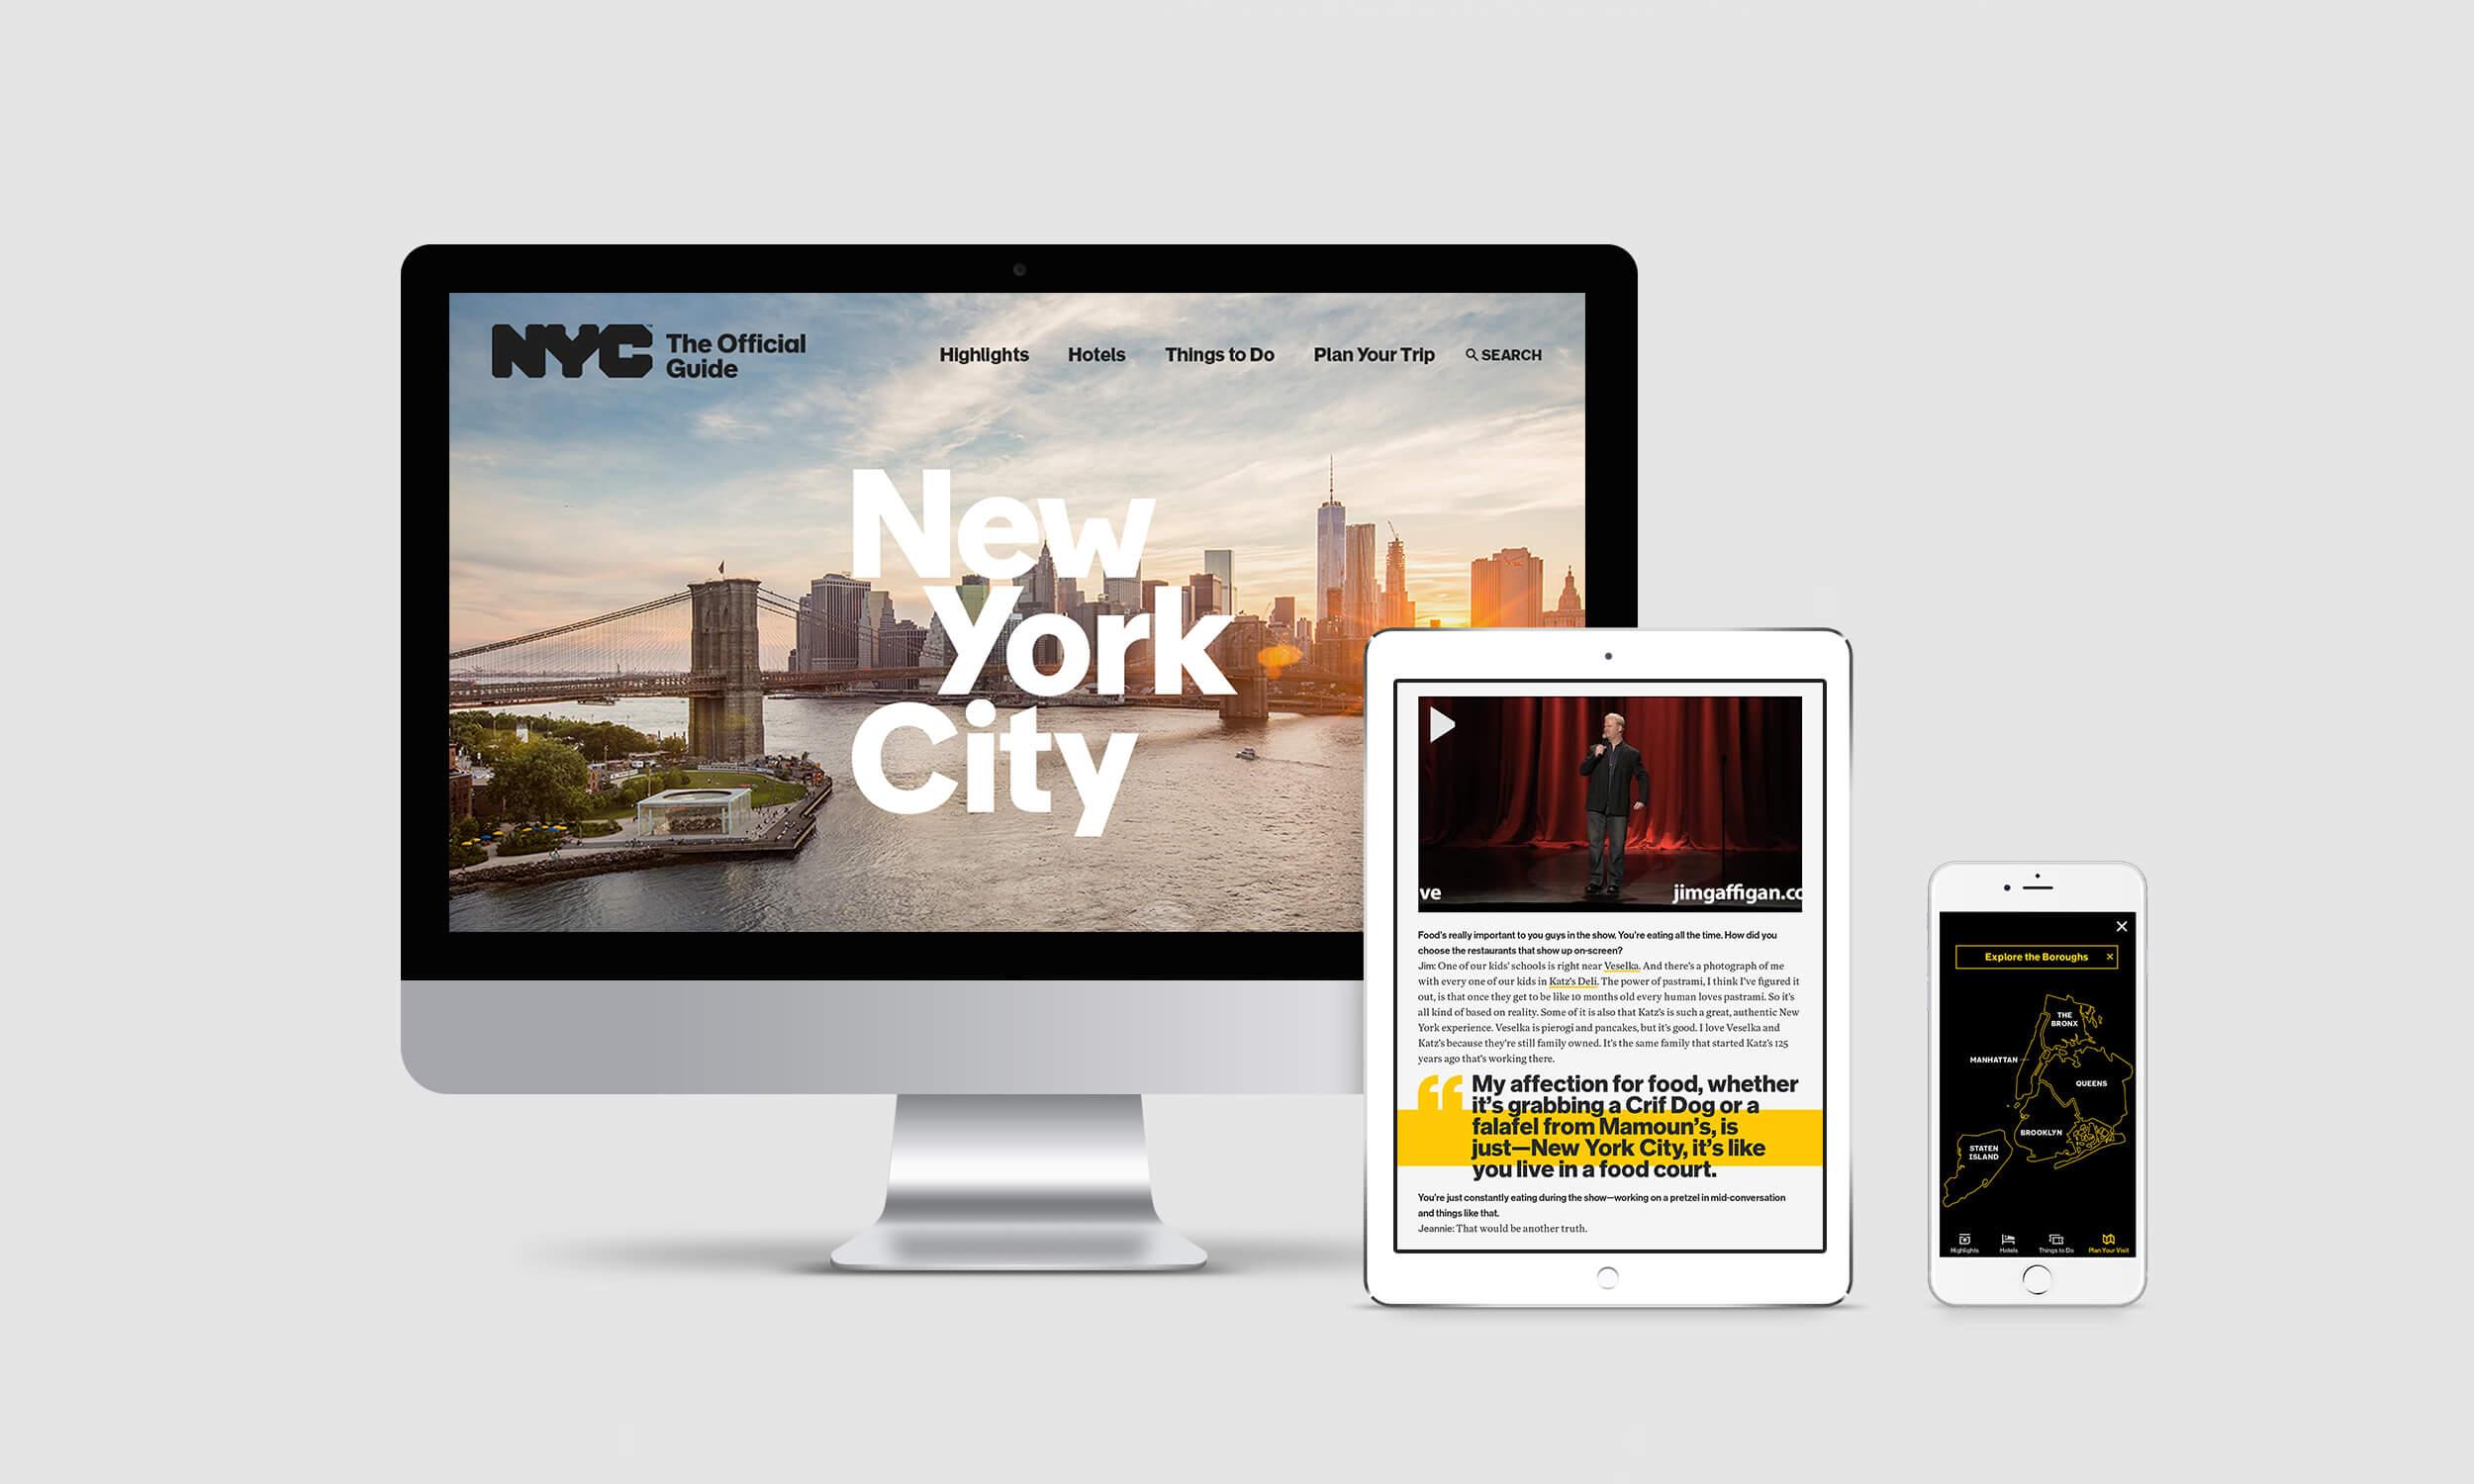 What's in store: E-commerce-based Business Website Design in the Core of New York